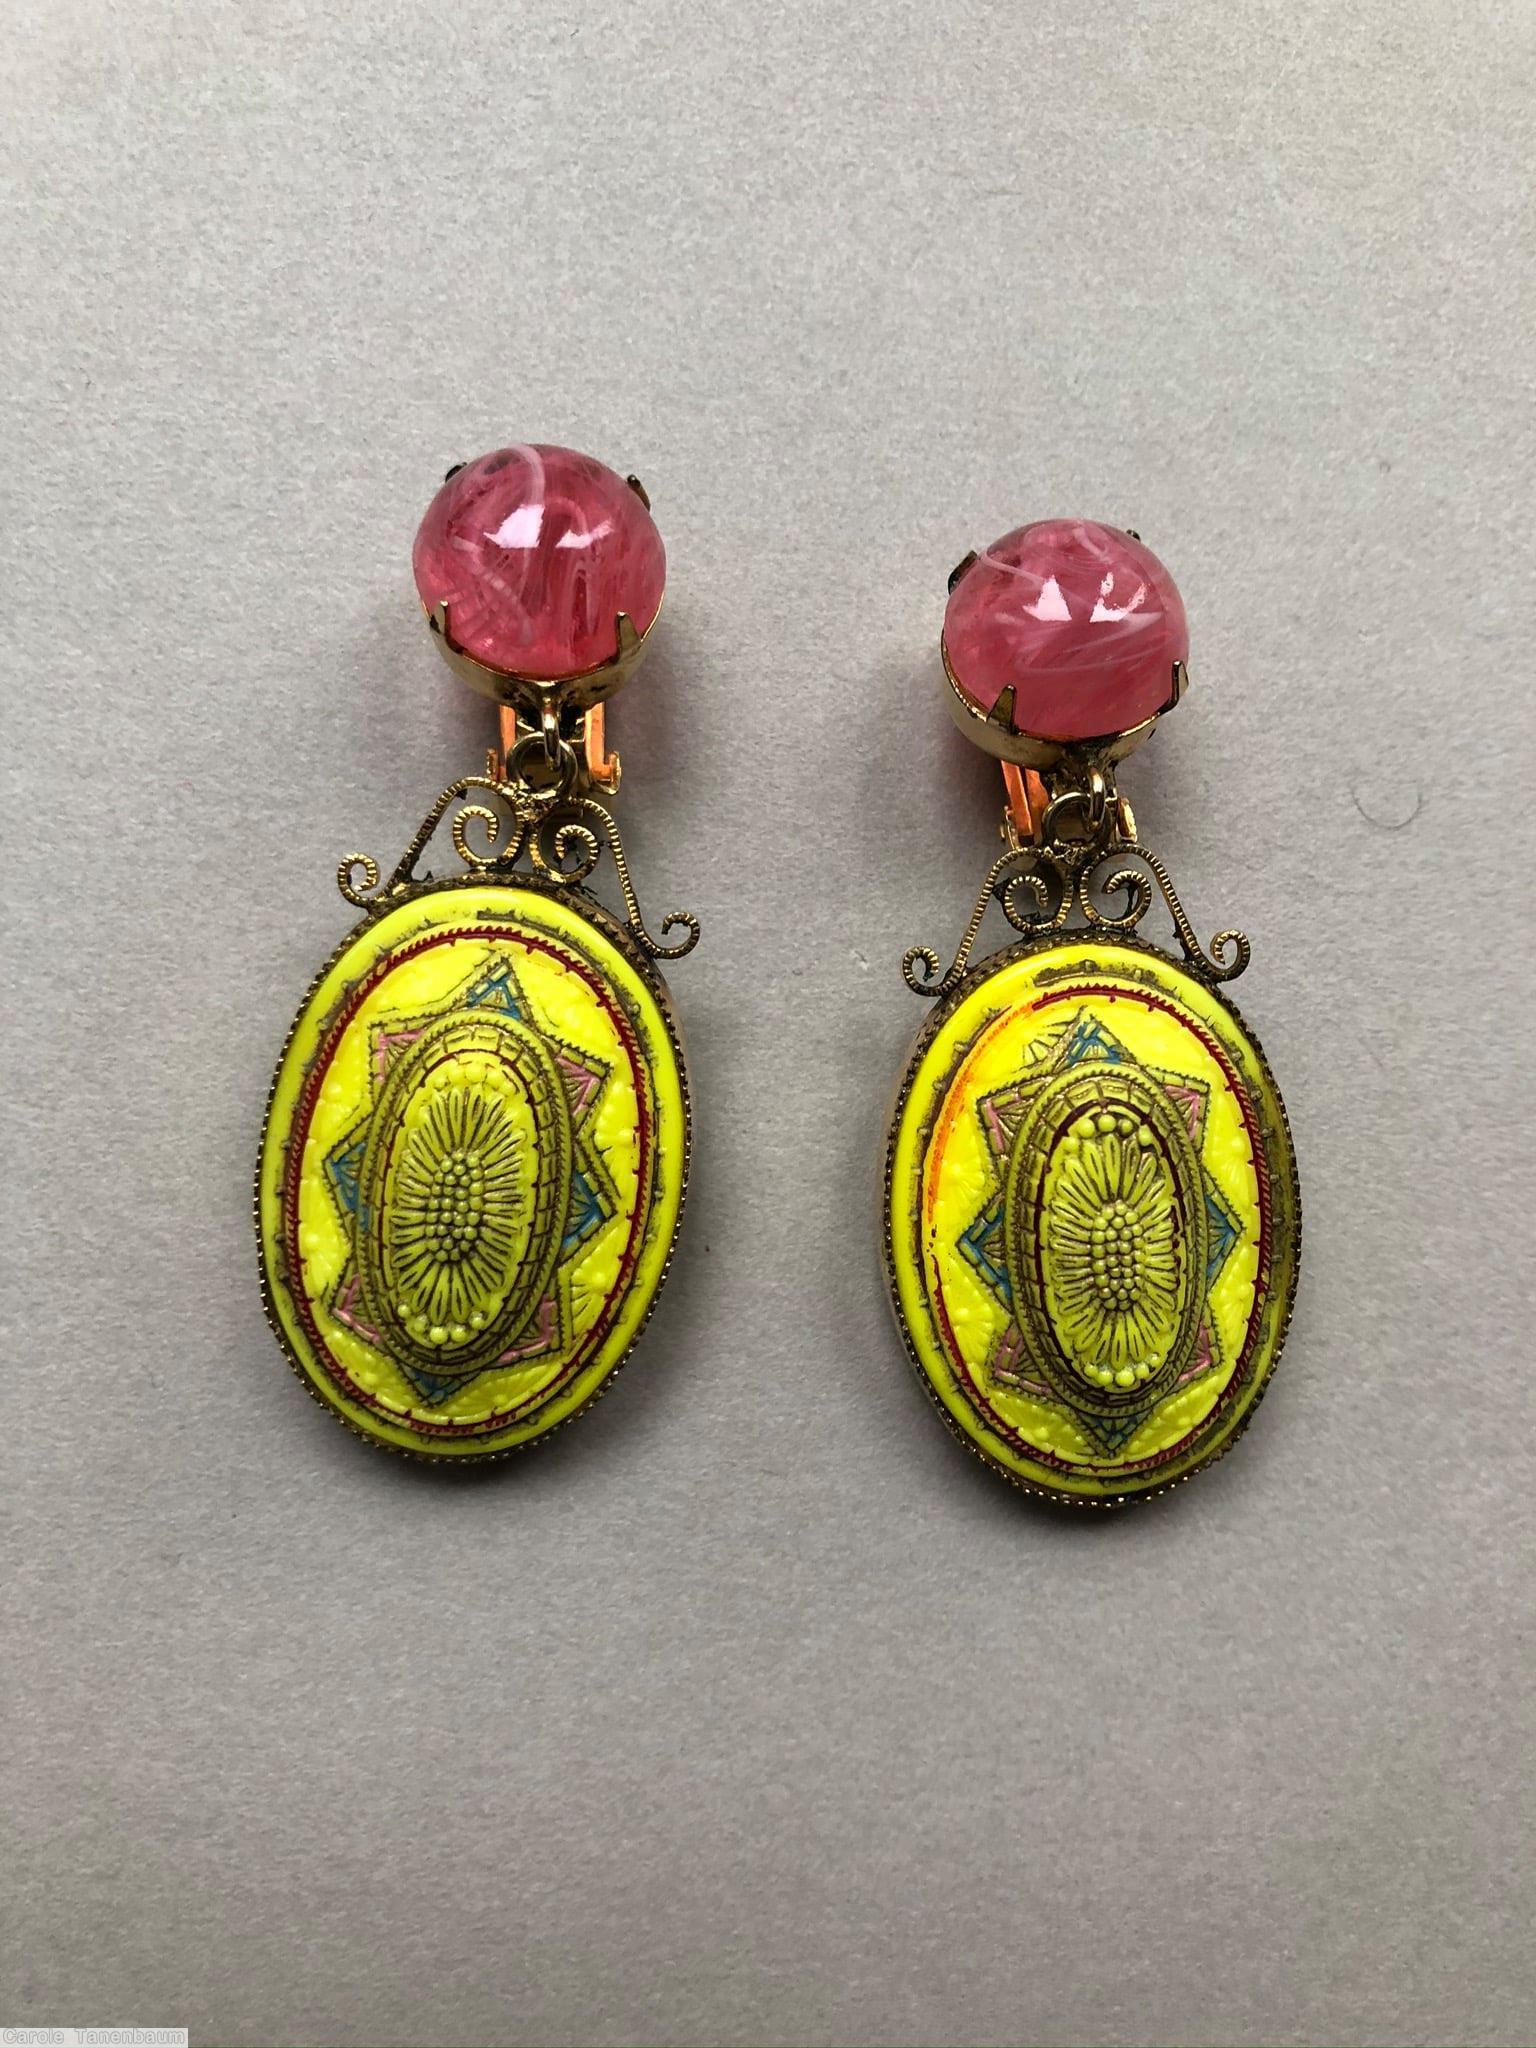 Schreiner top down dangling earring top 1 round cab bottom large oval moroccan tile scollwork yellow moroccan disc marbled pink round cab goldtone jewelry